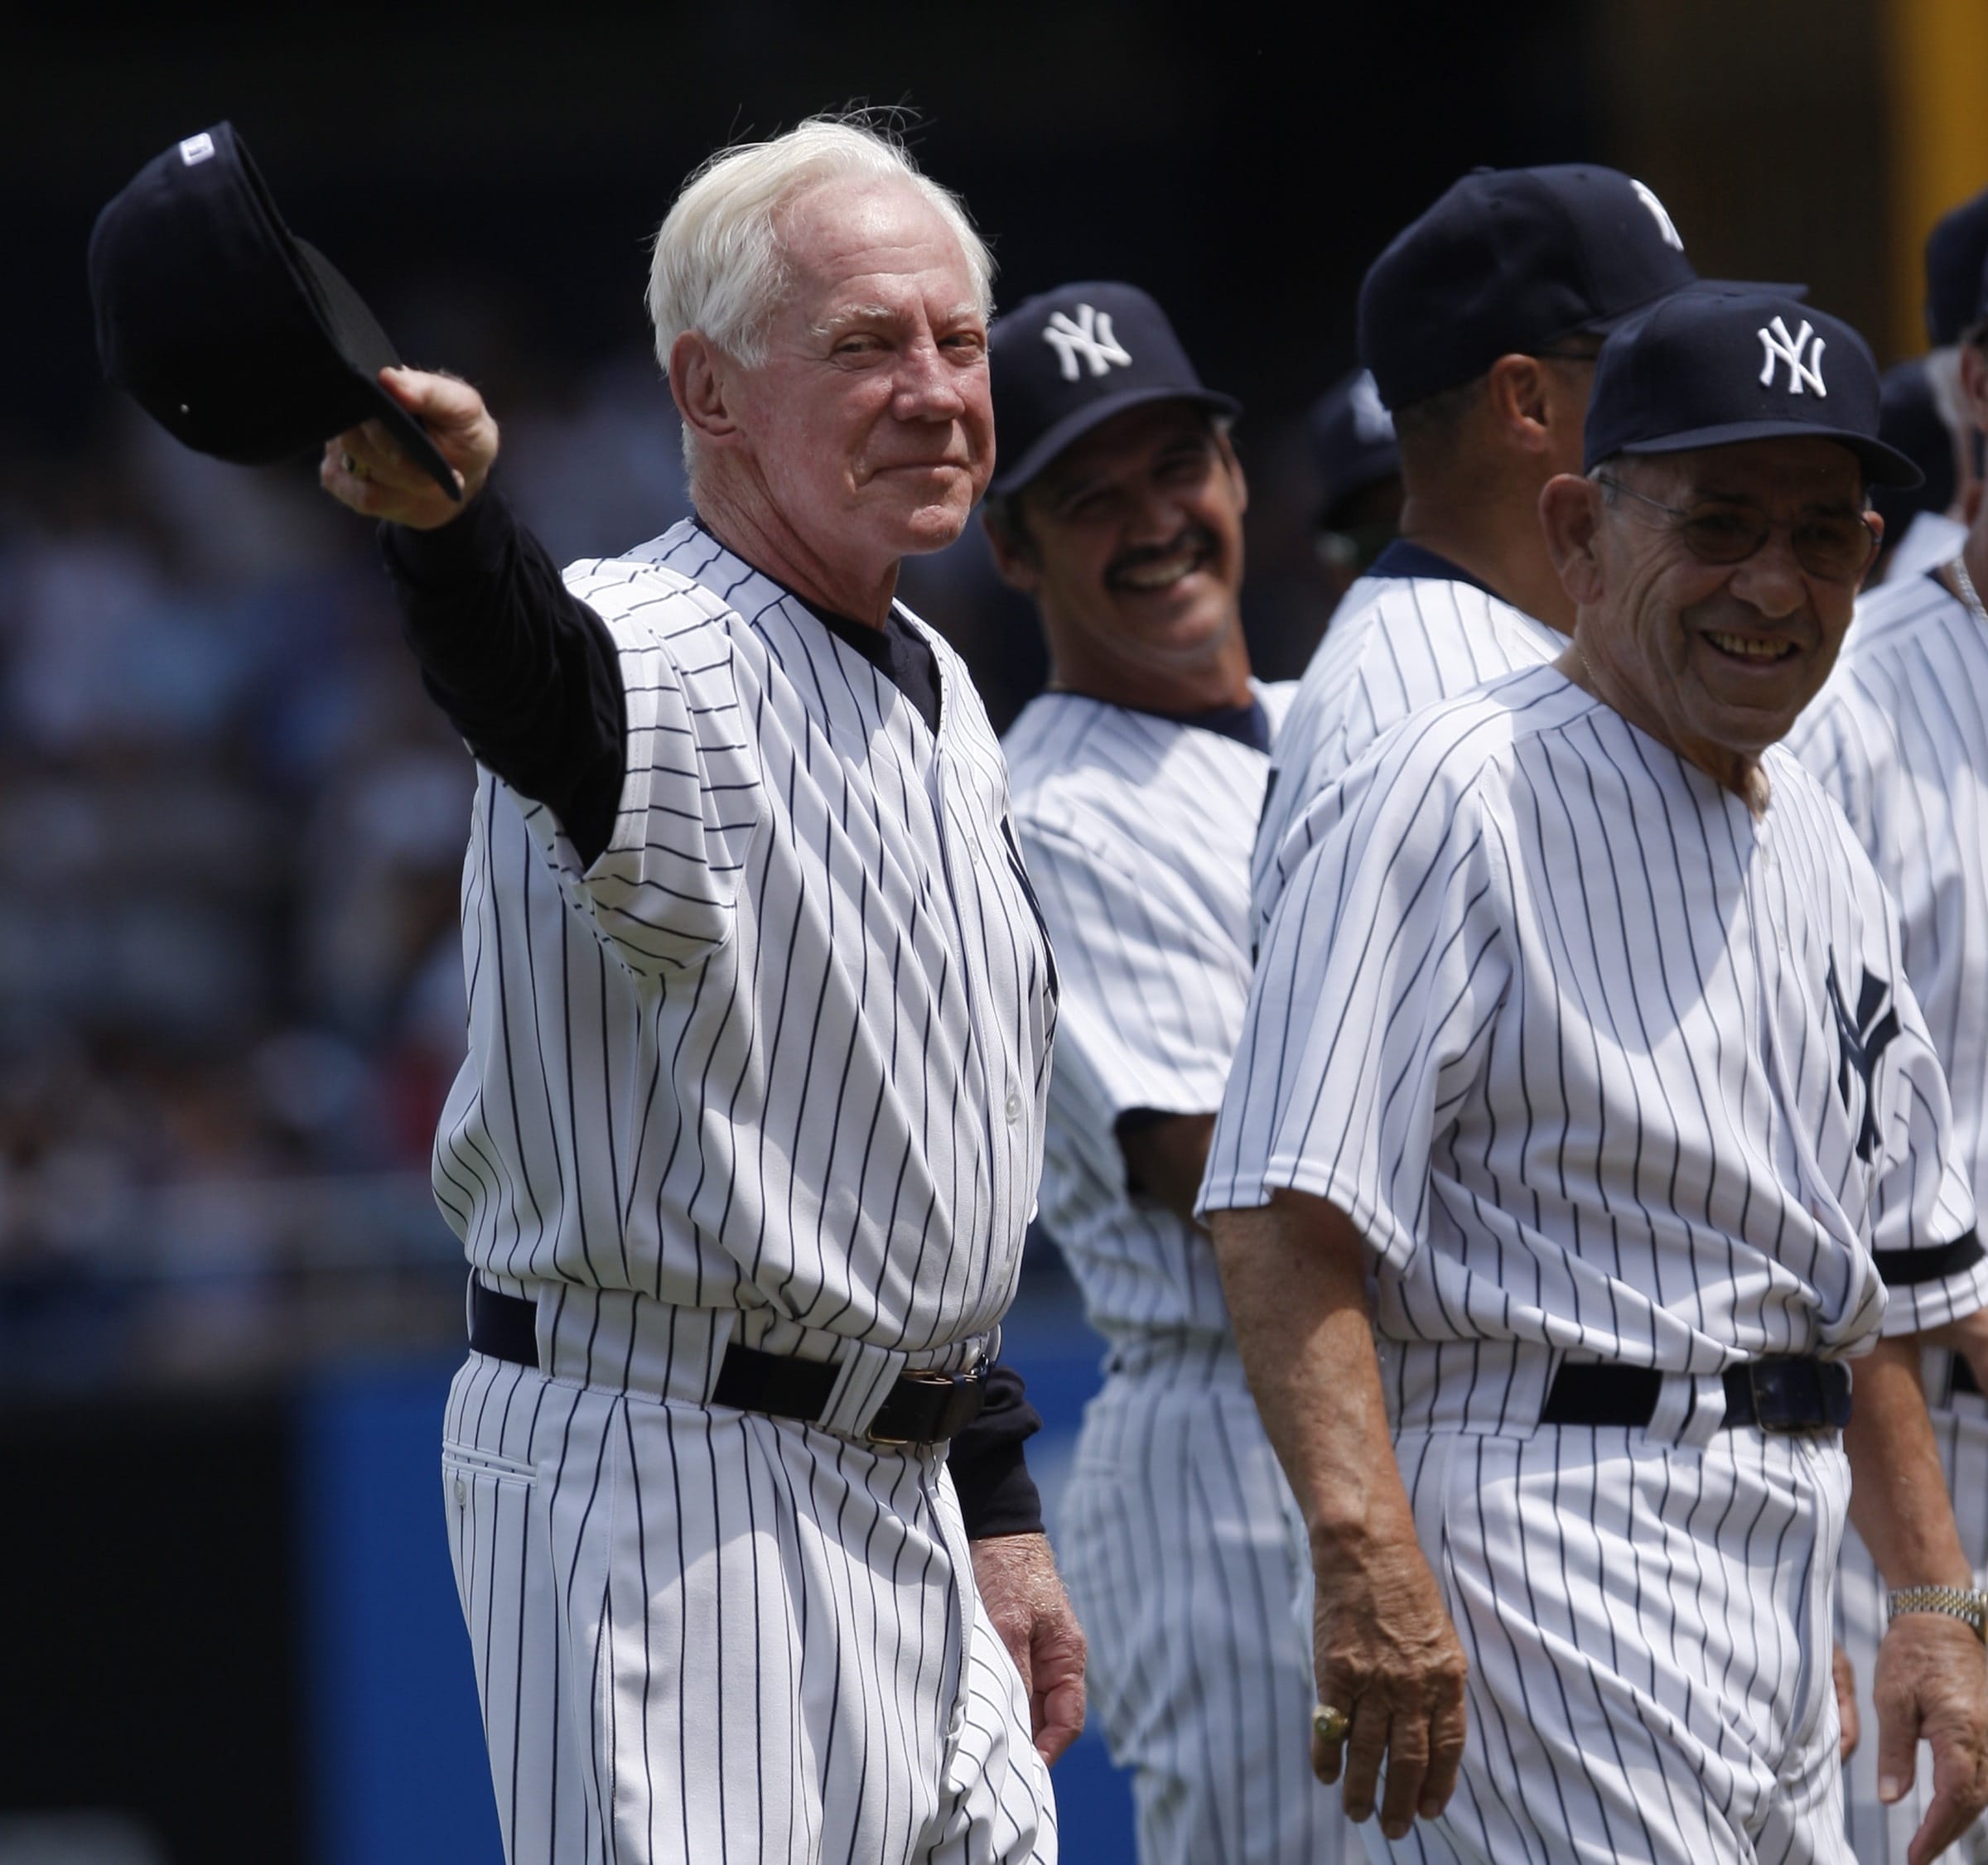 Whitey Ford, pitcher who epitomized mighty Yankees, dies at 91